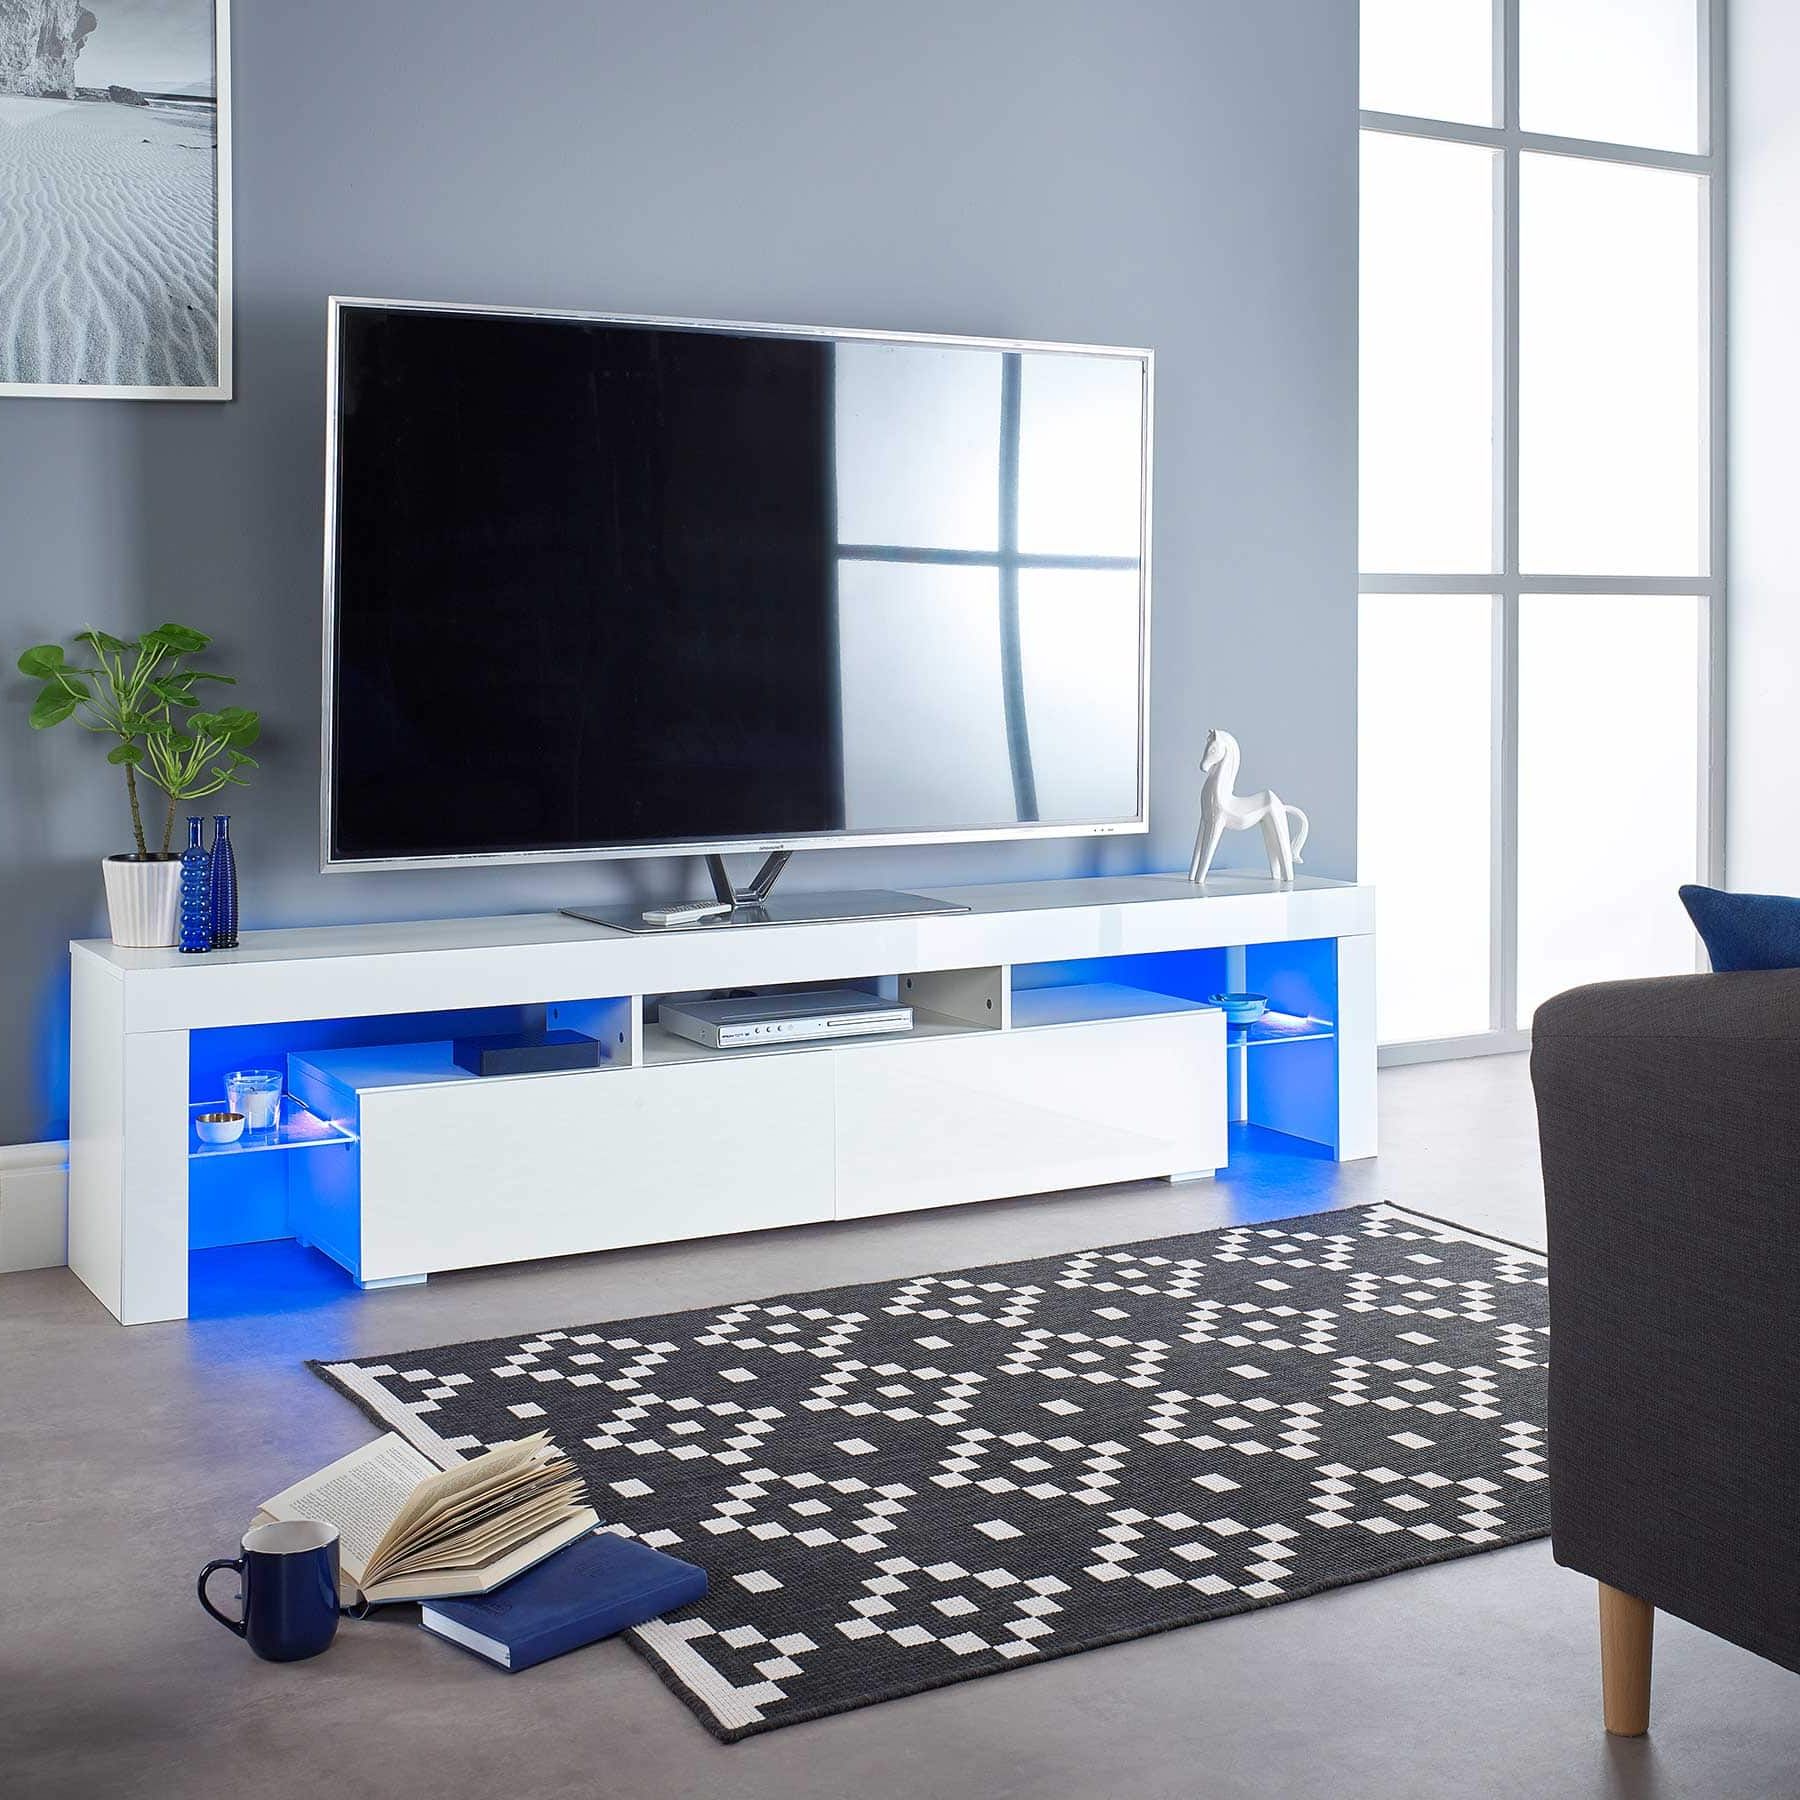 Ts1704 Wide 200cm White Tv Cabinet For Up To 80″ Screens | Mmt Inside Bromley Blue Wide Tv Stands (Gallery 9 of 20)